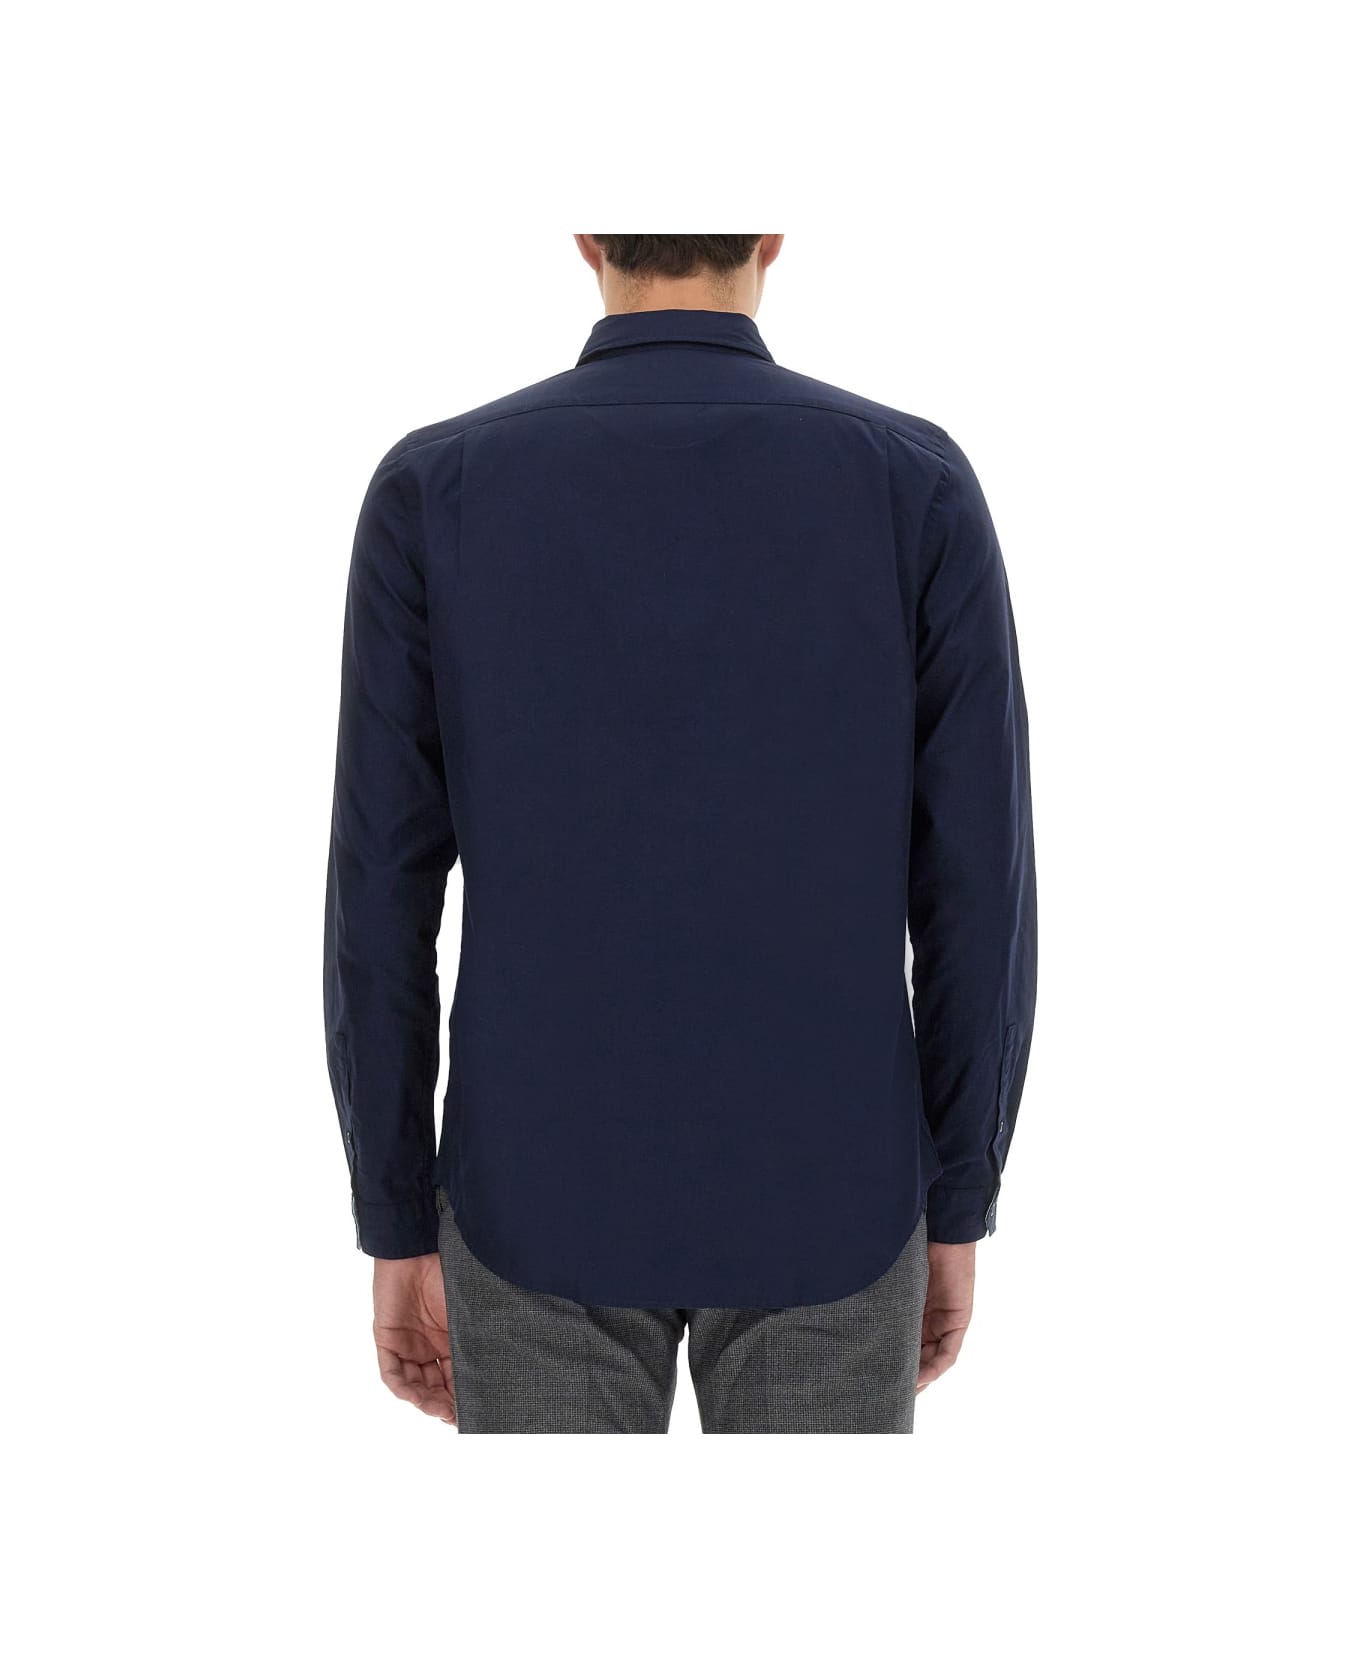 PS by Paul Smith Regular Fit Shirt - BLUE シャツ